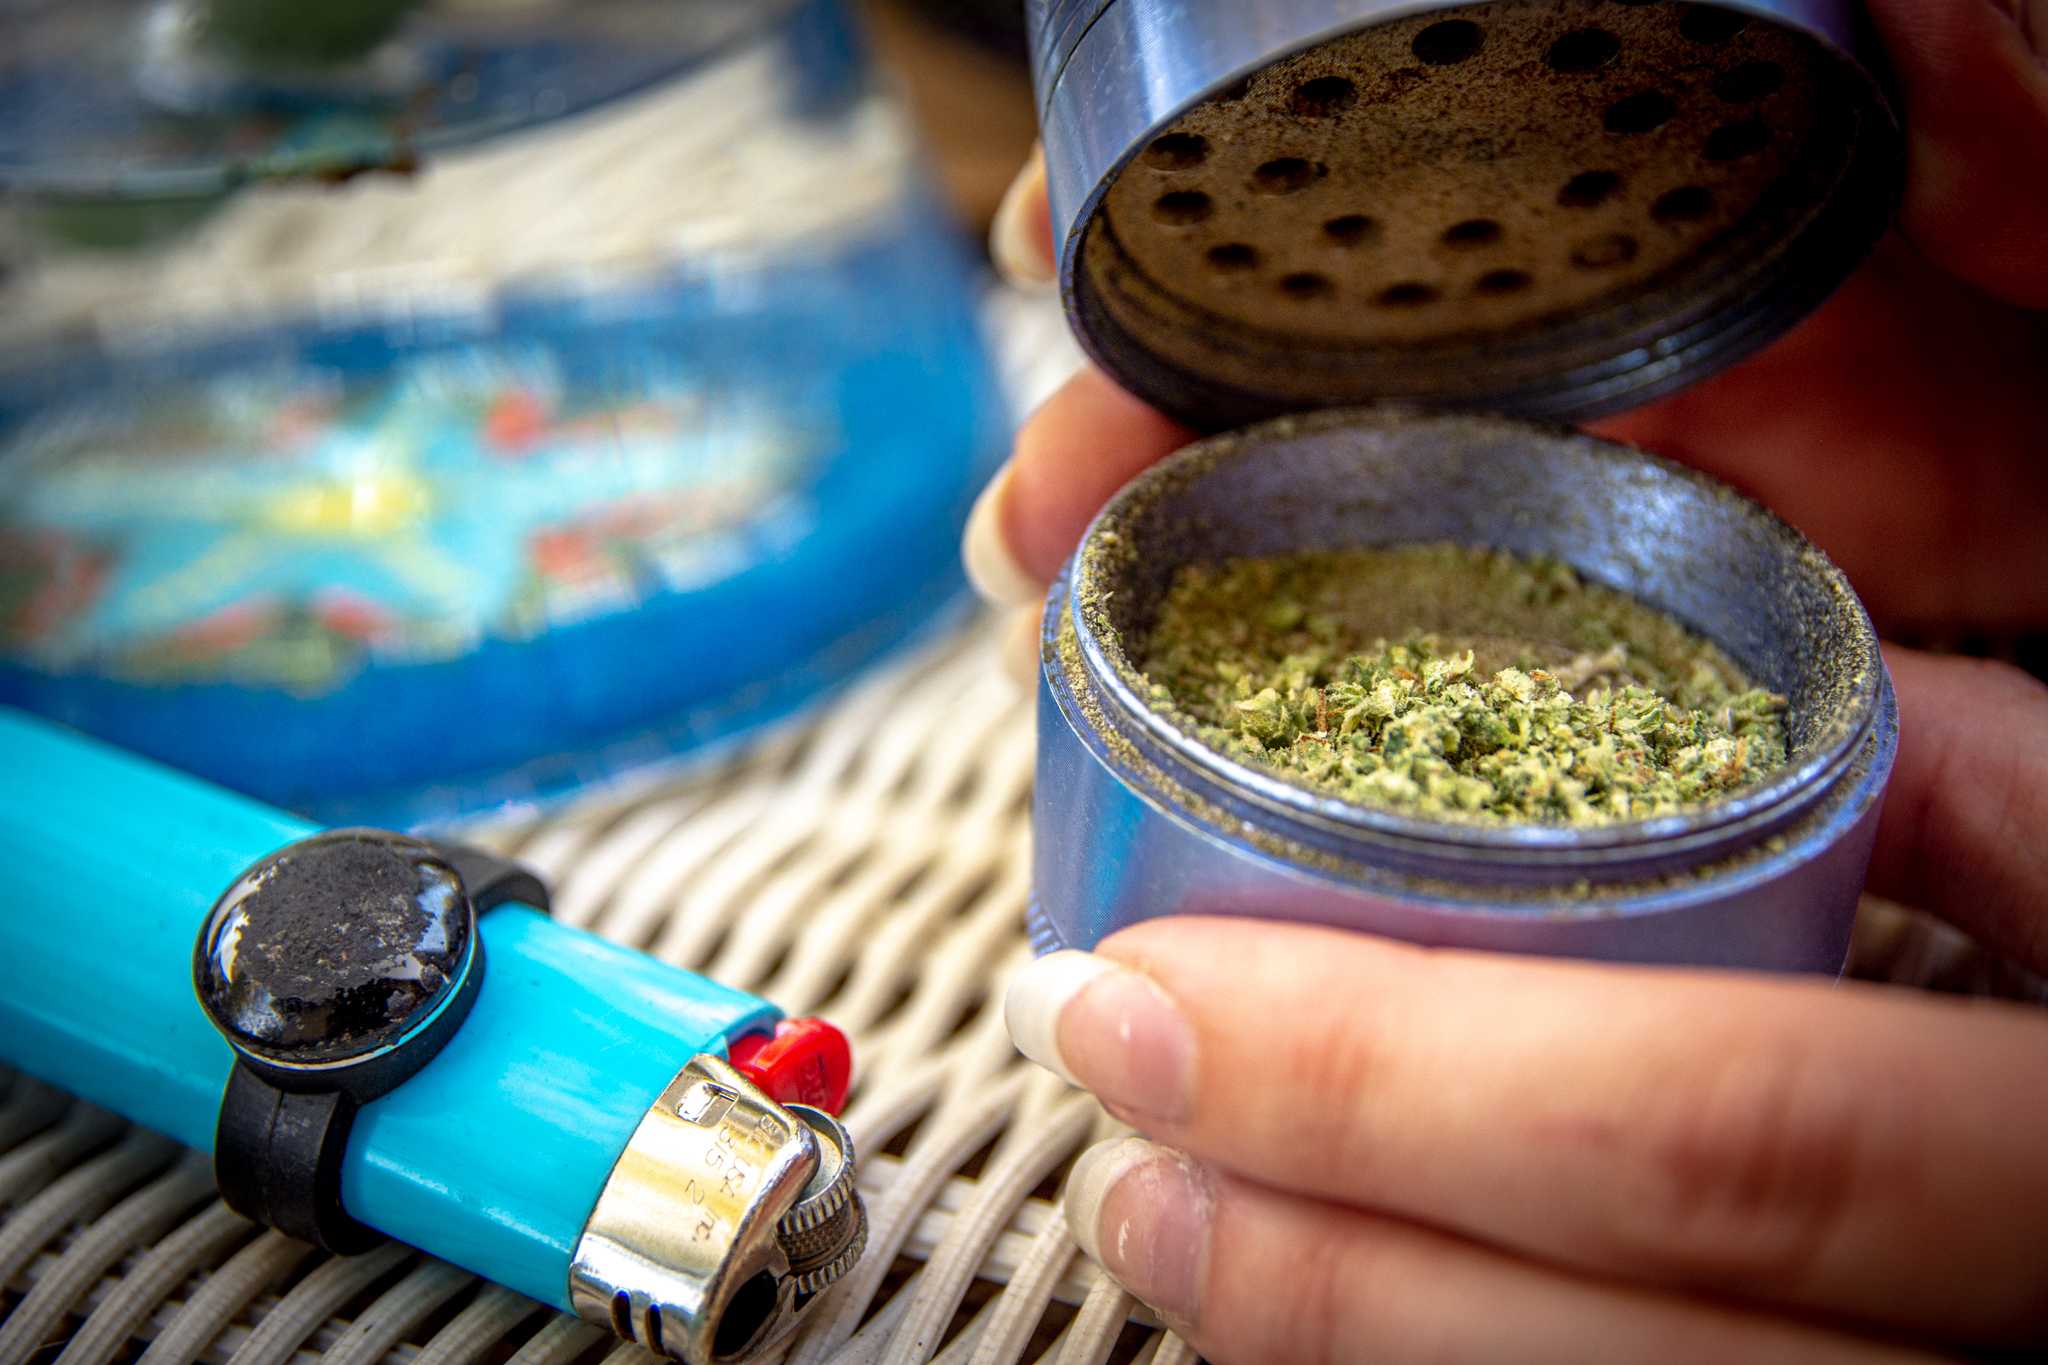 Marijuana sits in a grinder next to a lighter